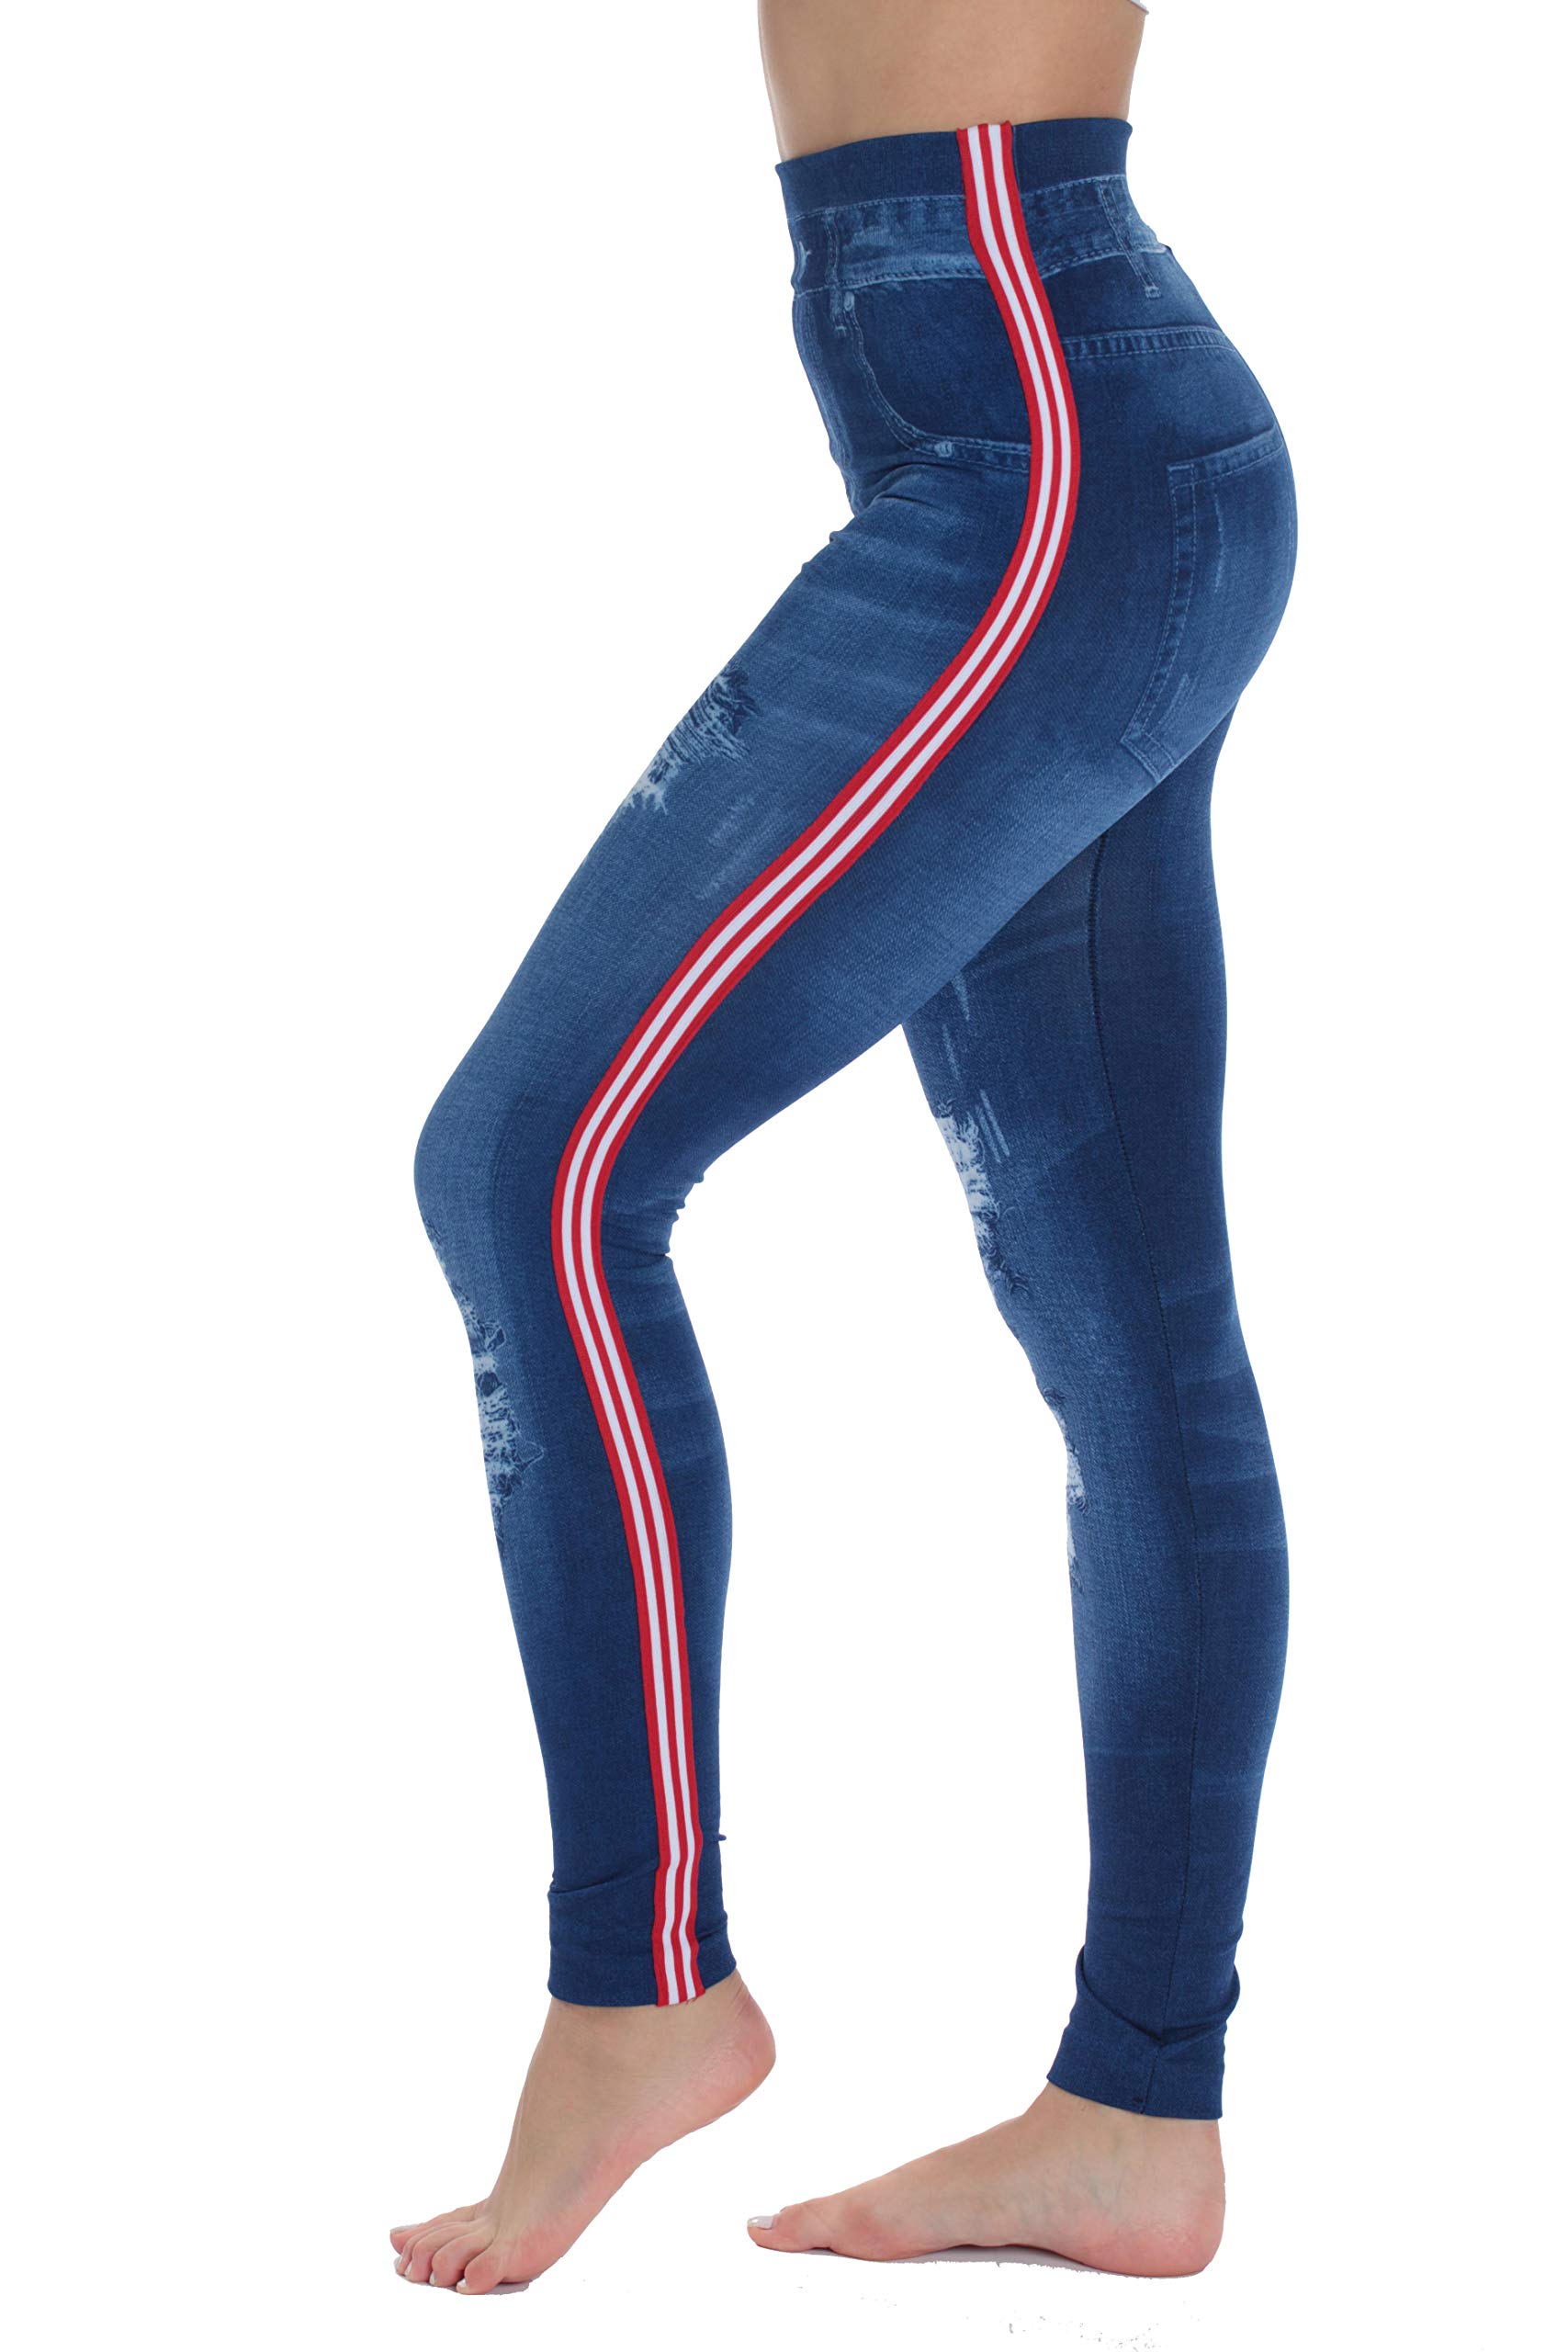 Just Love Women's Denim Wash Leggings - Stretchy and Comfortable Skinny Pants (Blue Striped, Small - Medium) - image 2 of 3